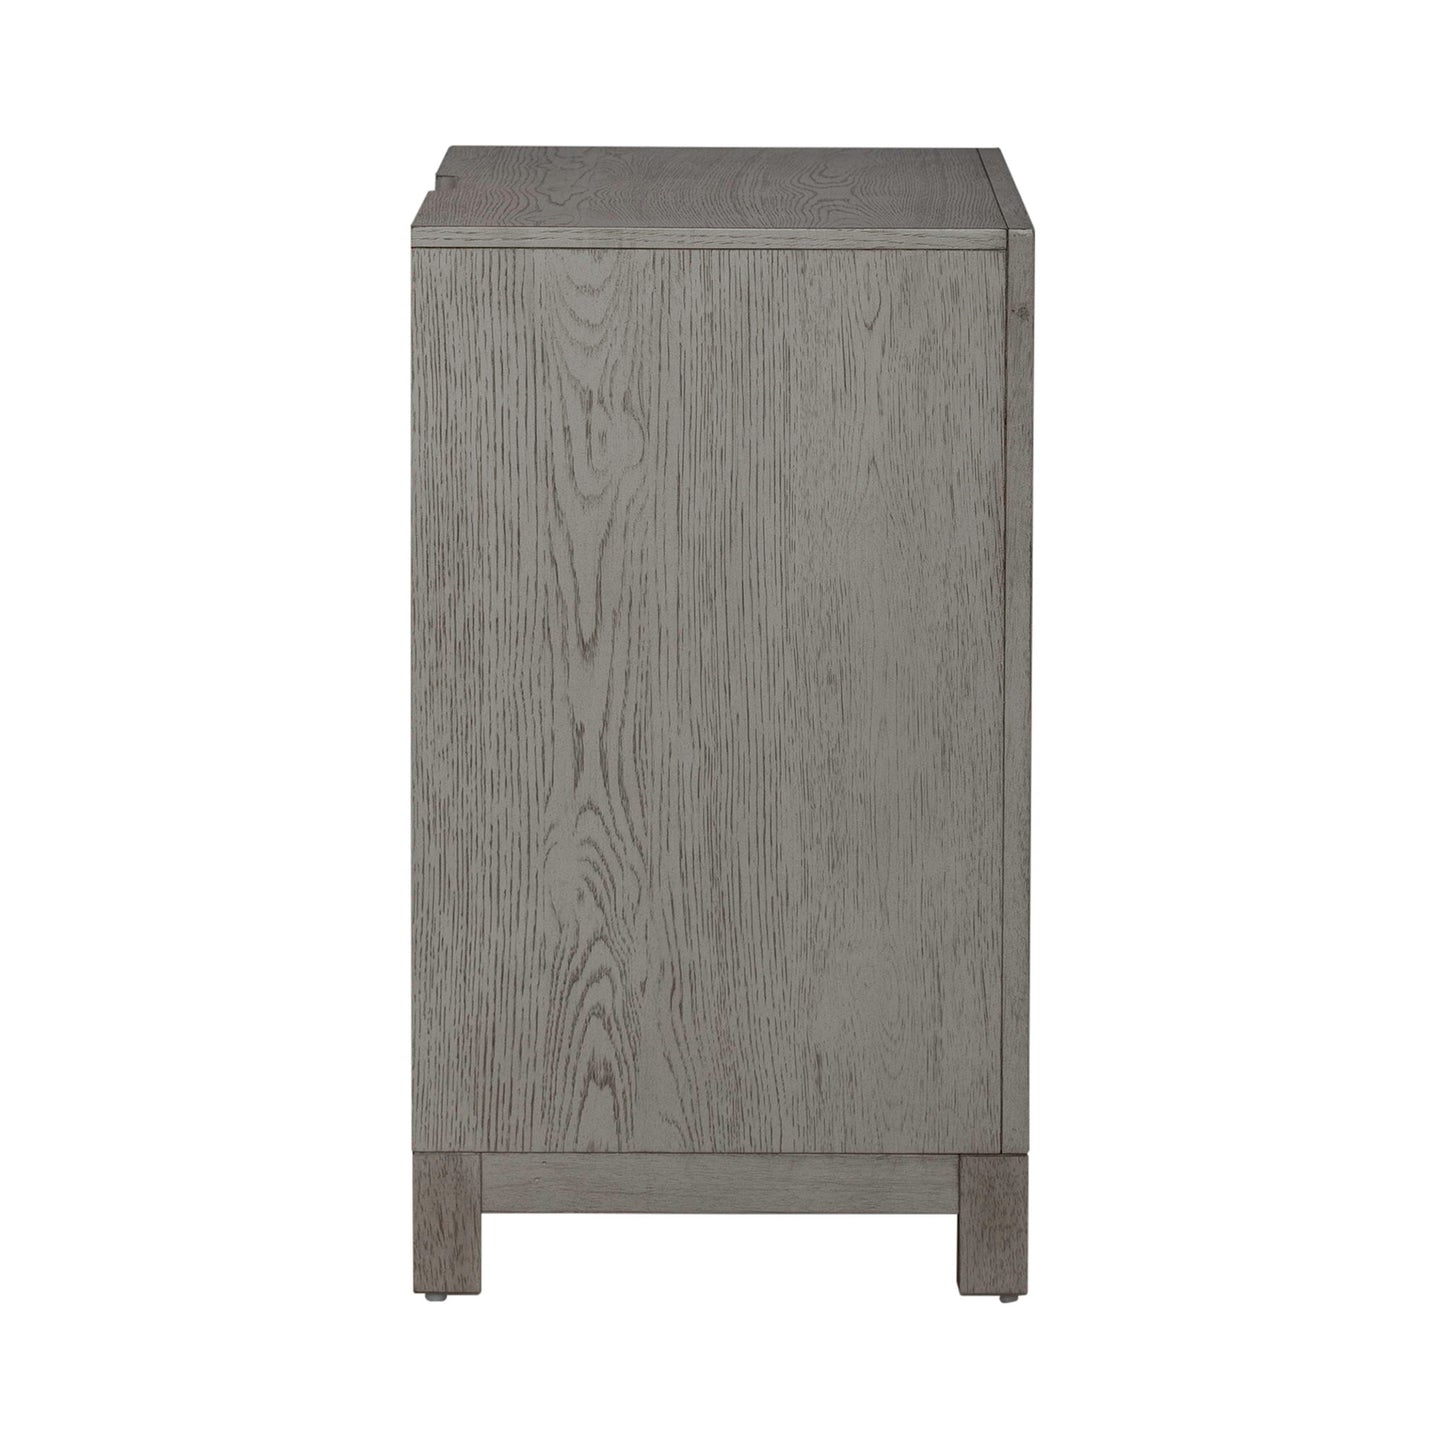 Palmetto Heights - 2 Drawer Night Stand With Charging Station